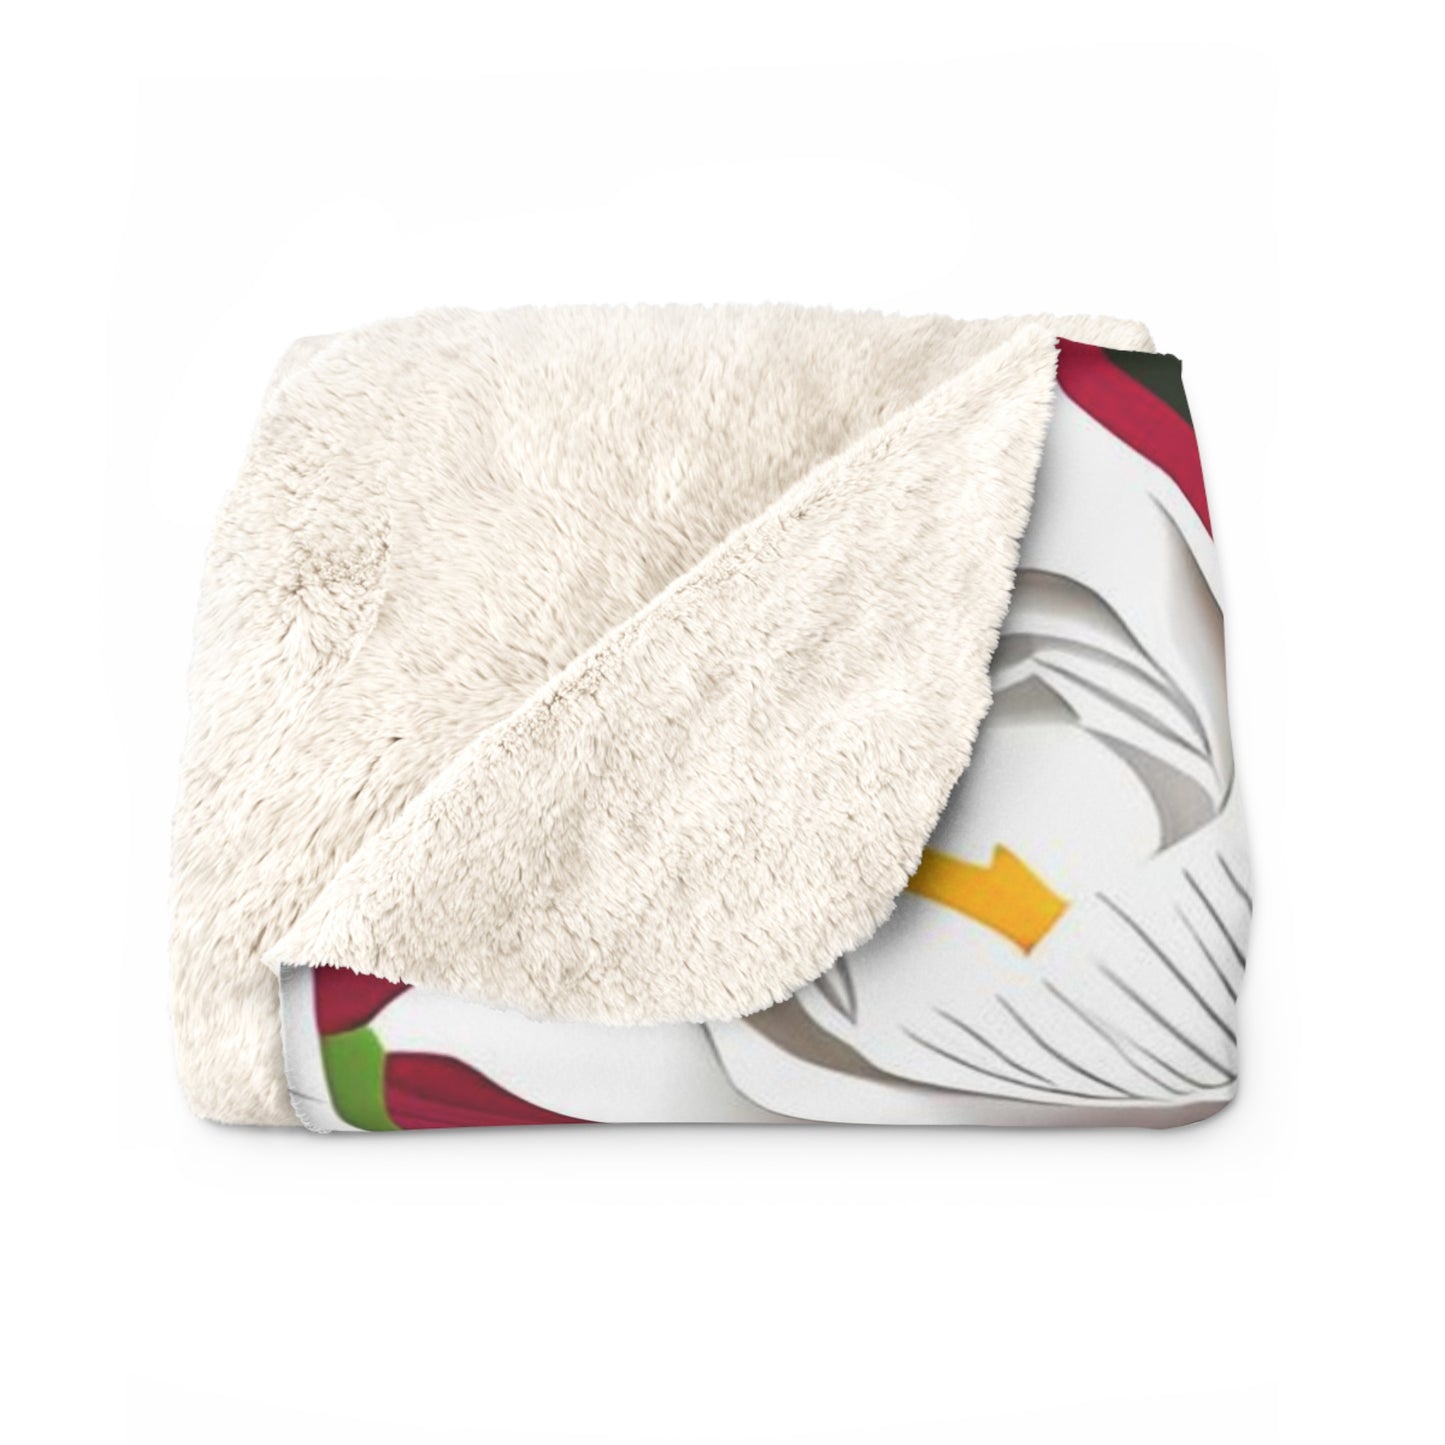 Sherpa Fleece Blanket for Cozy Warmth, 50"x60" - White Flowers on Red